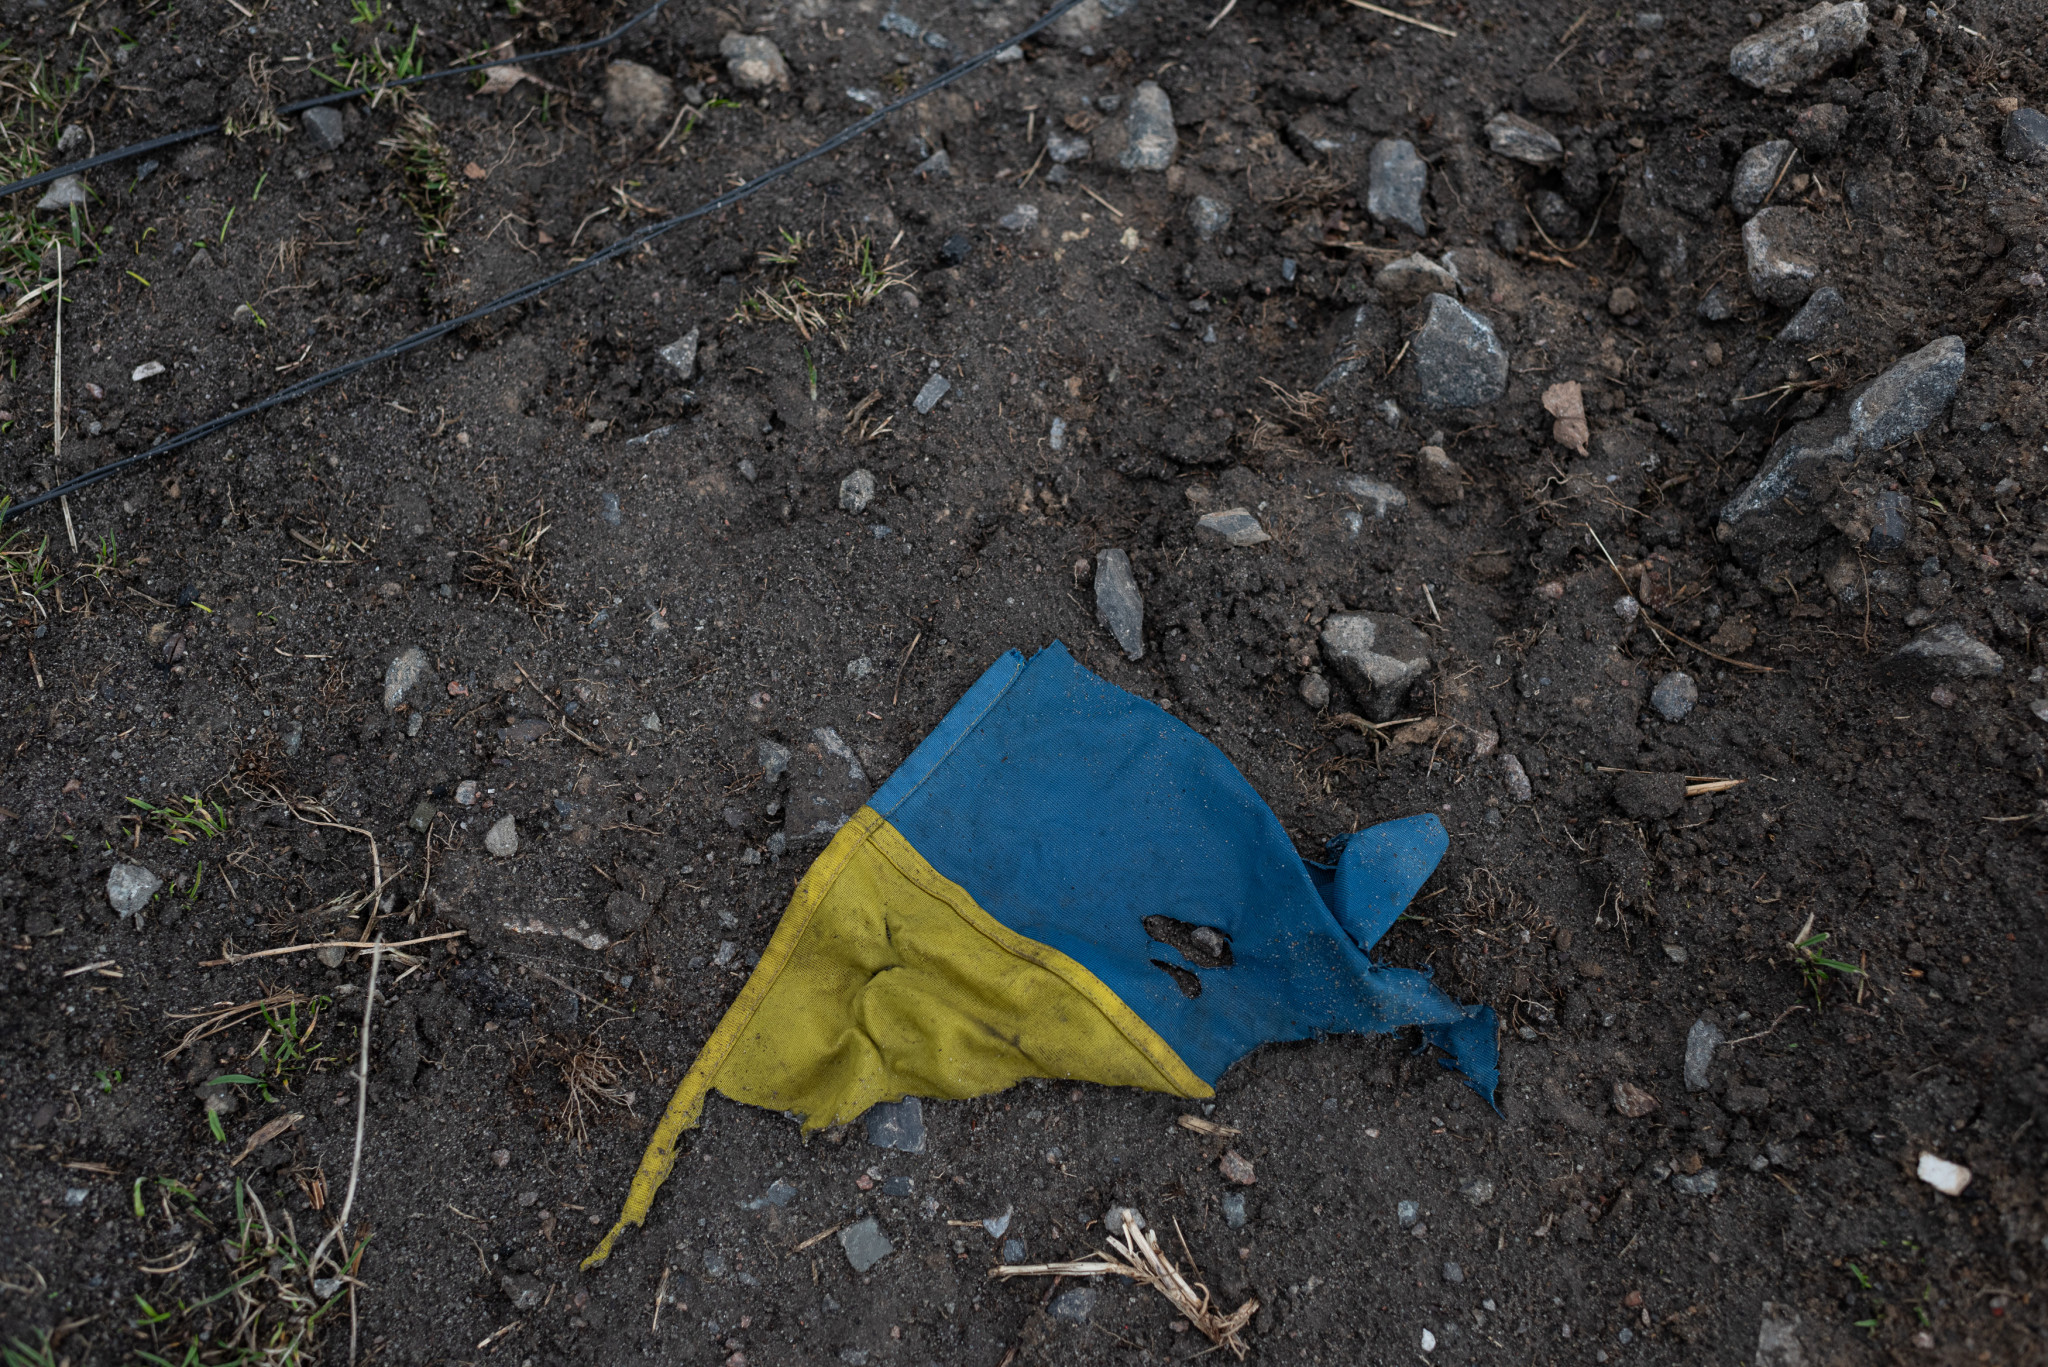 Russia has been accused of genocide by Ukraine and Poland ©Getty Images